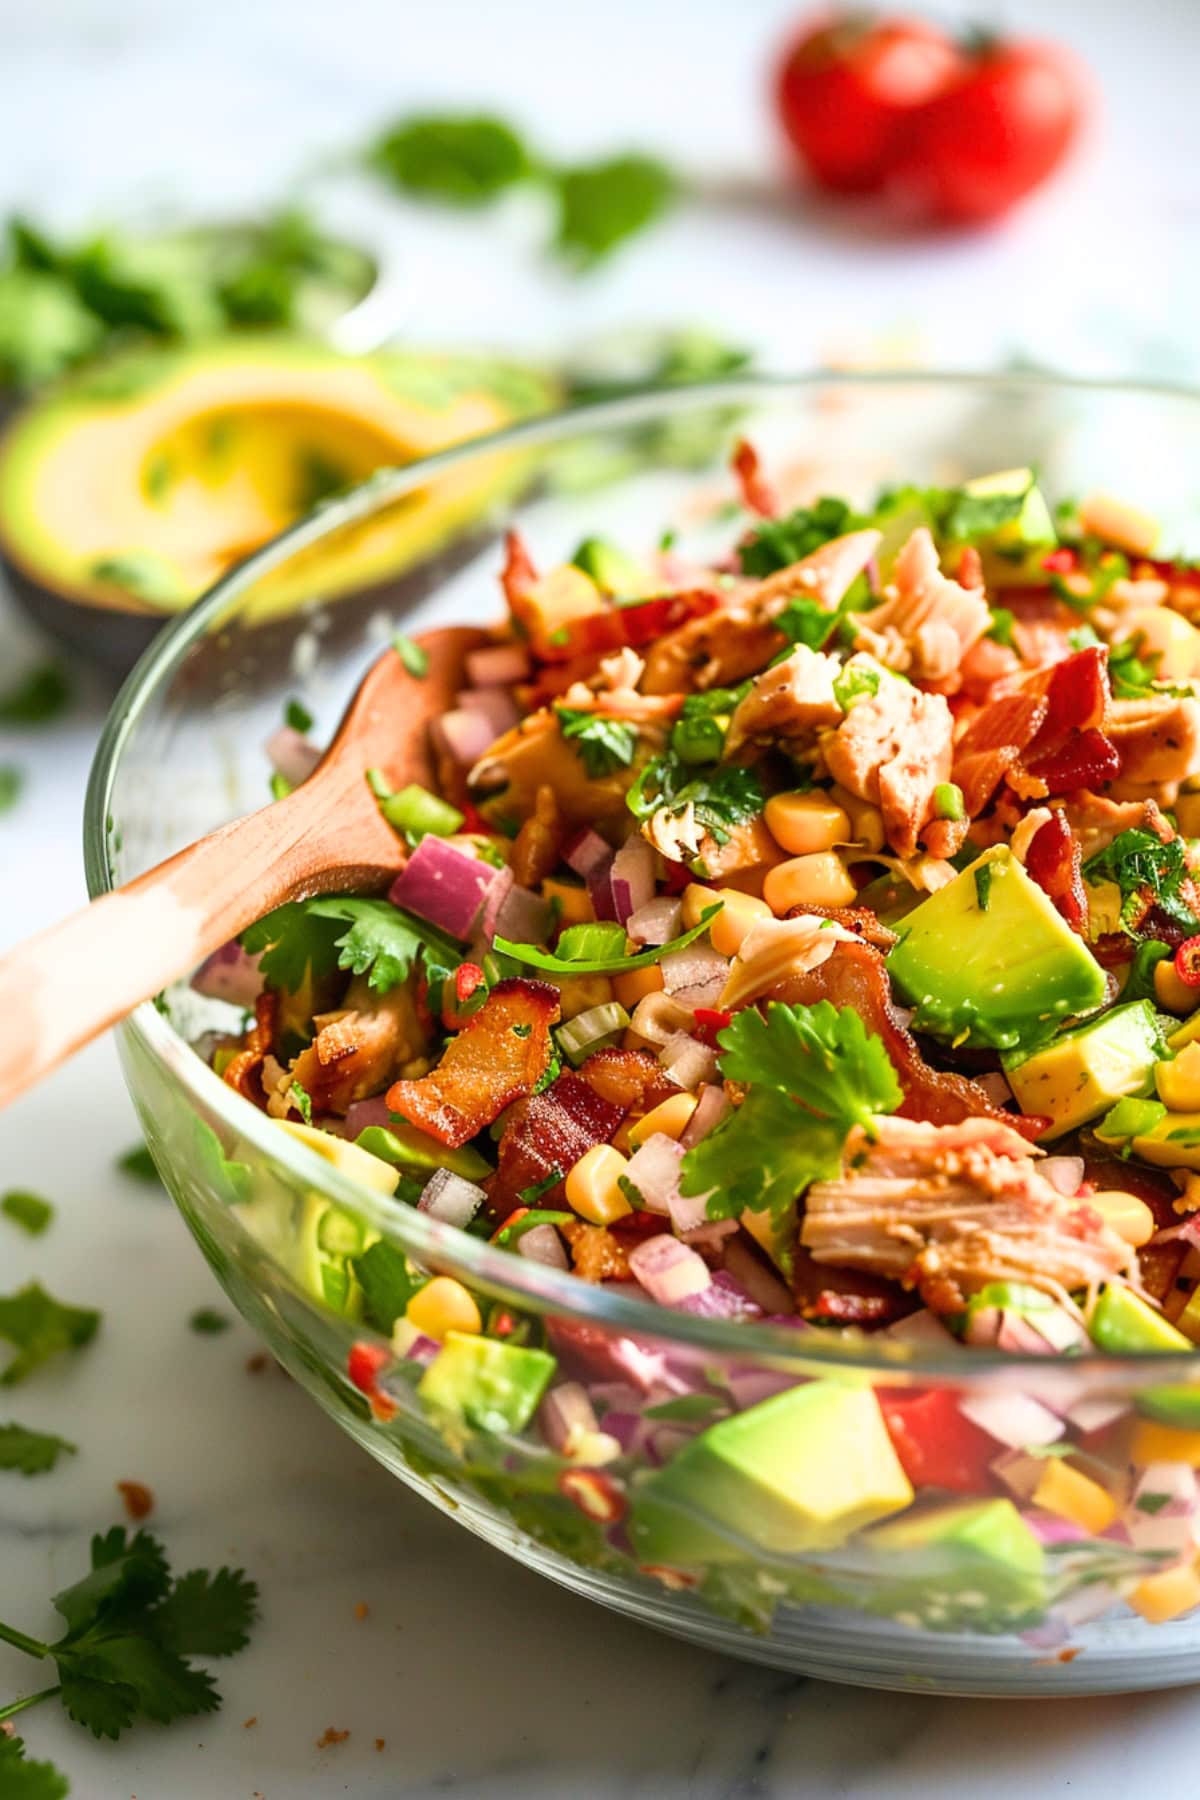 Mix of bacon, cooked and crumbled, shredded chicken breasts, small square slice ripe avocados, corn kernels, finely chopped small red onion, fresh cilantro chopped with olive oil and lime juice dressing served in a glass bowl,